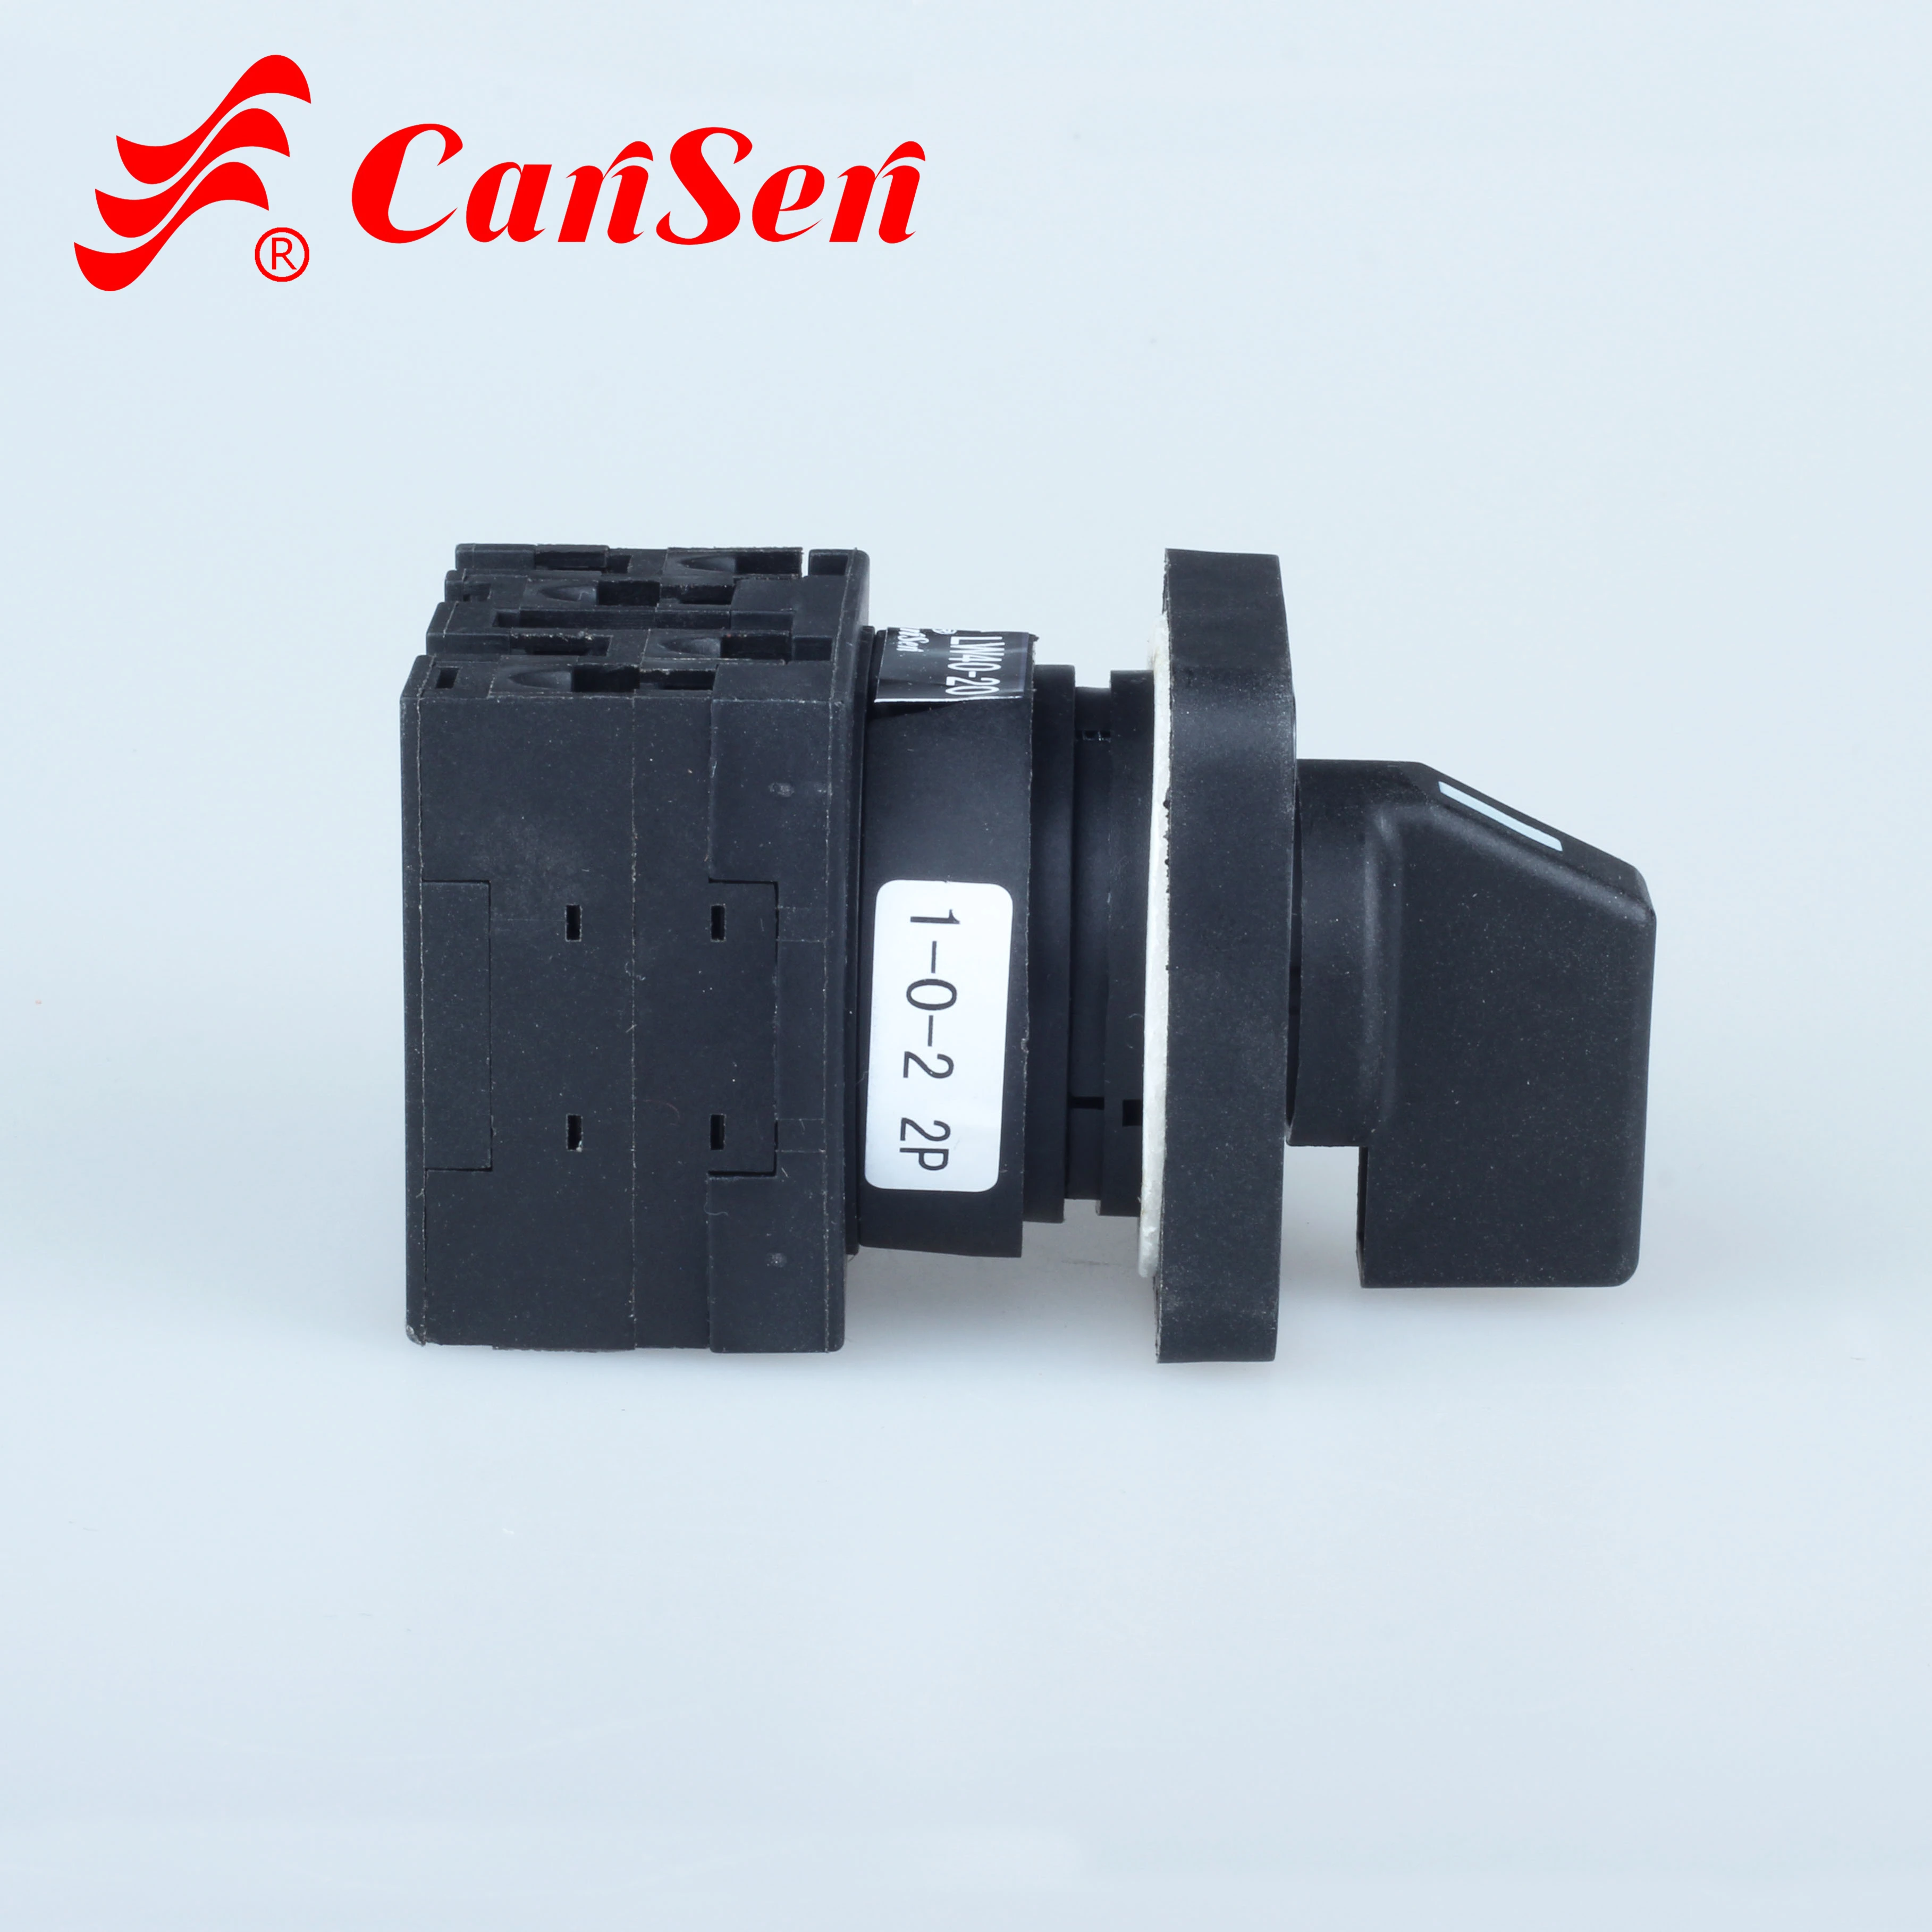 
Cansen LW40-20 1-0-2 2P CE certificate universal changeover rotary cam changeover switch 